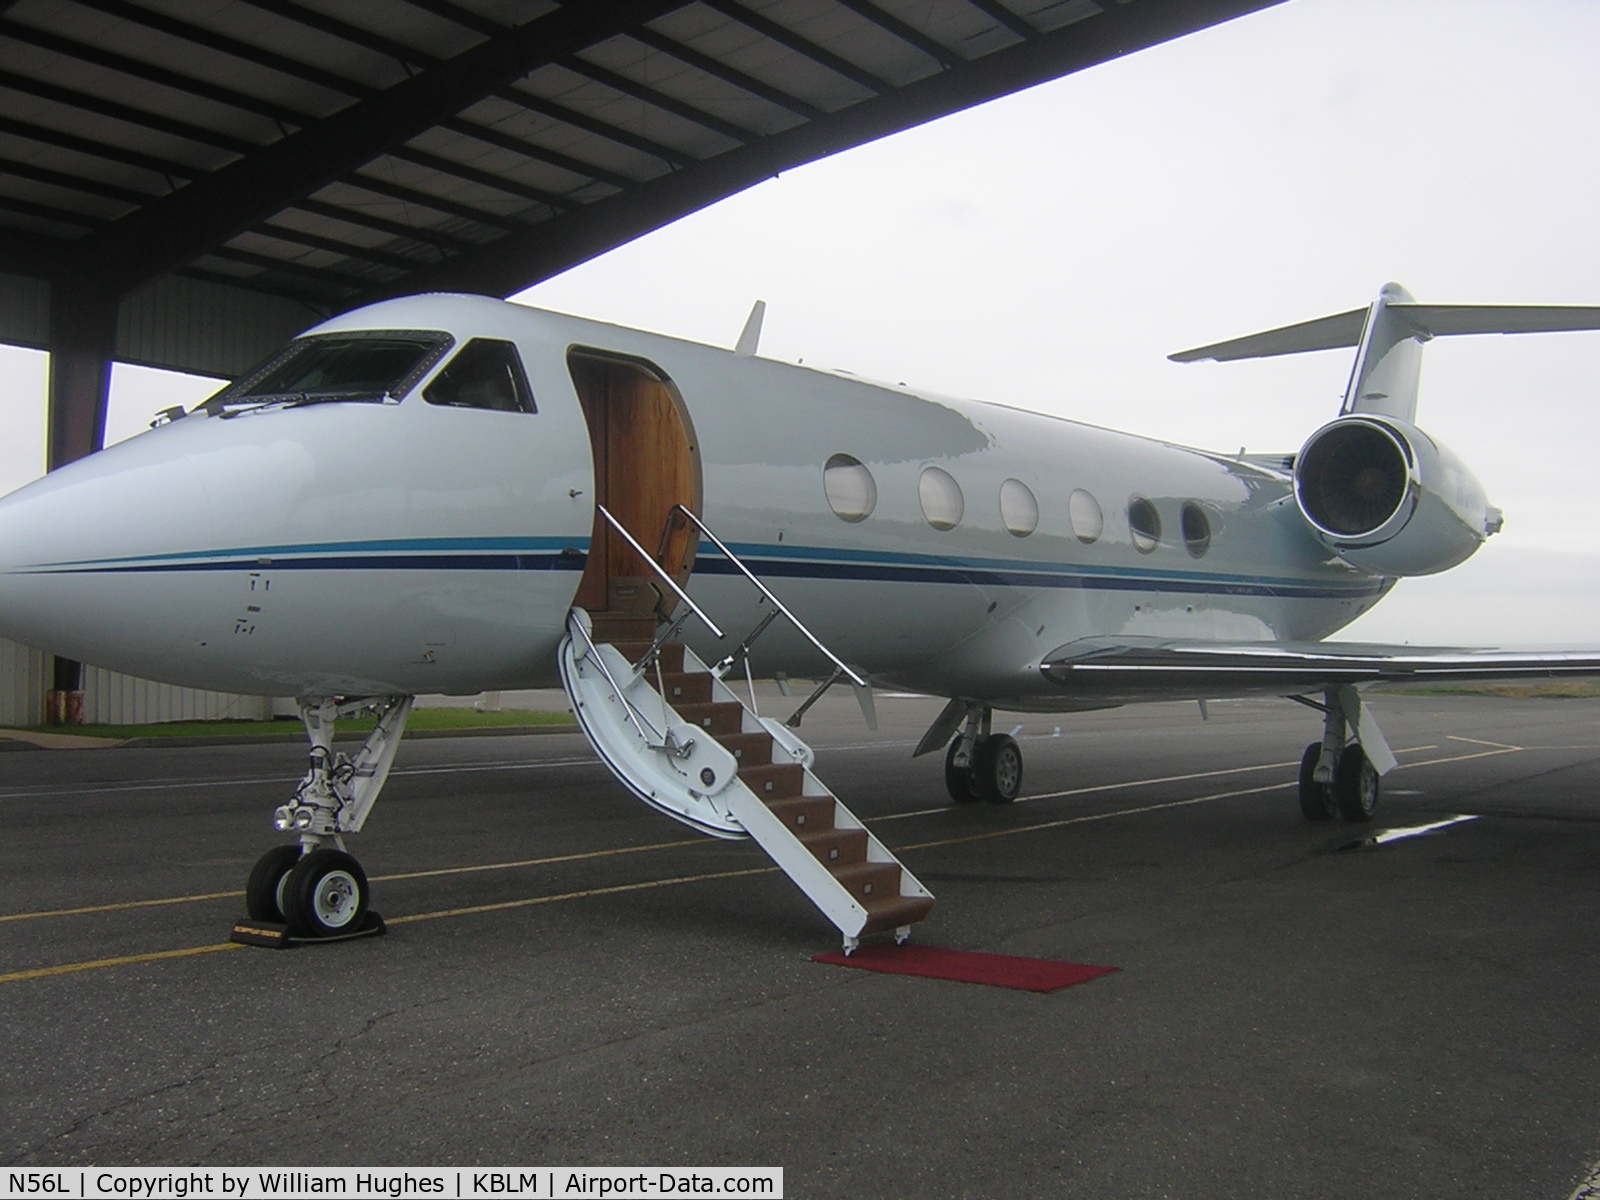 N56L, 1993 Gulfstream Aerospace G-IV C/N 1213, leaving with celebrities heading to California (plane owned by FOX TV)